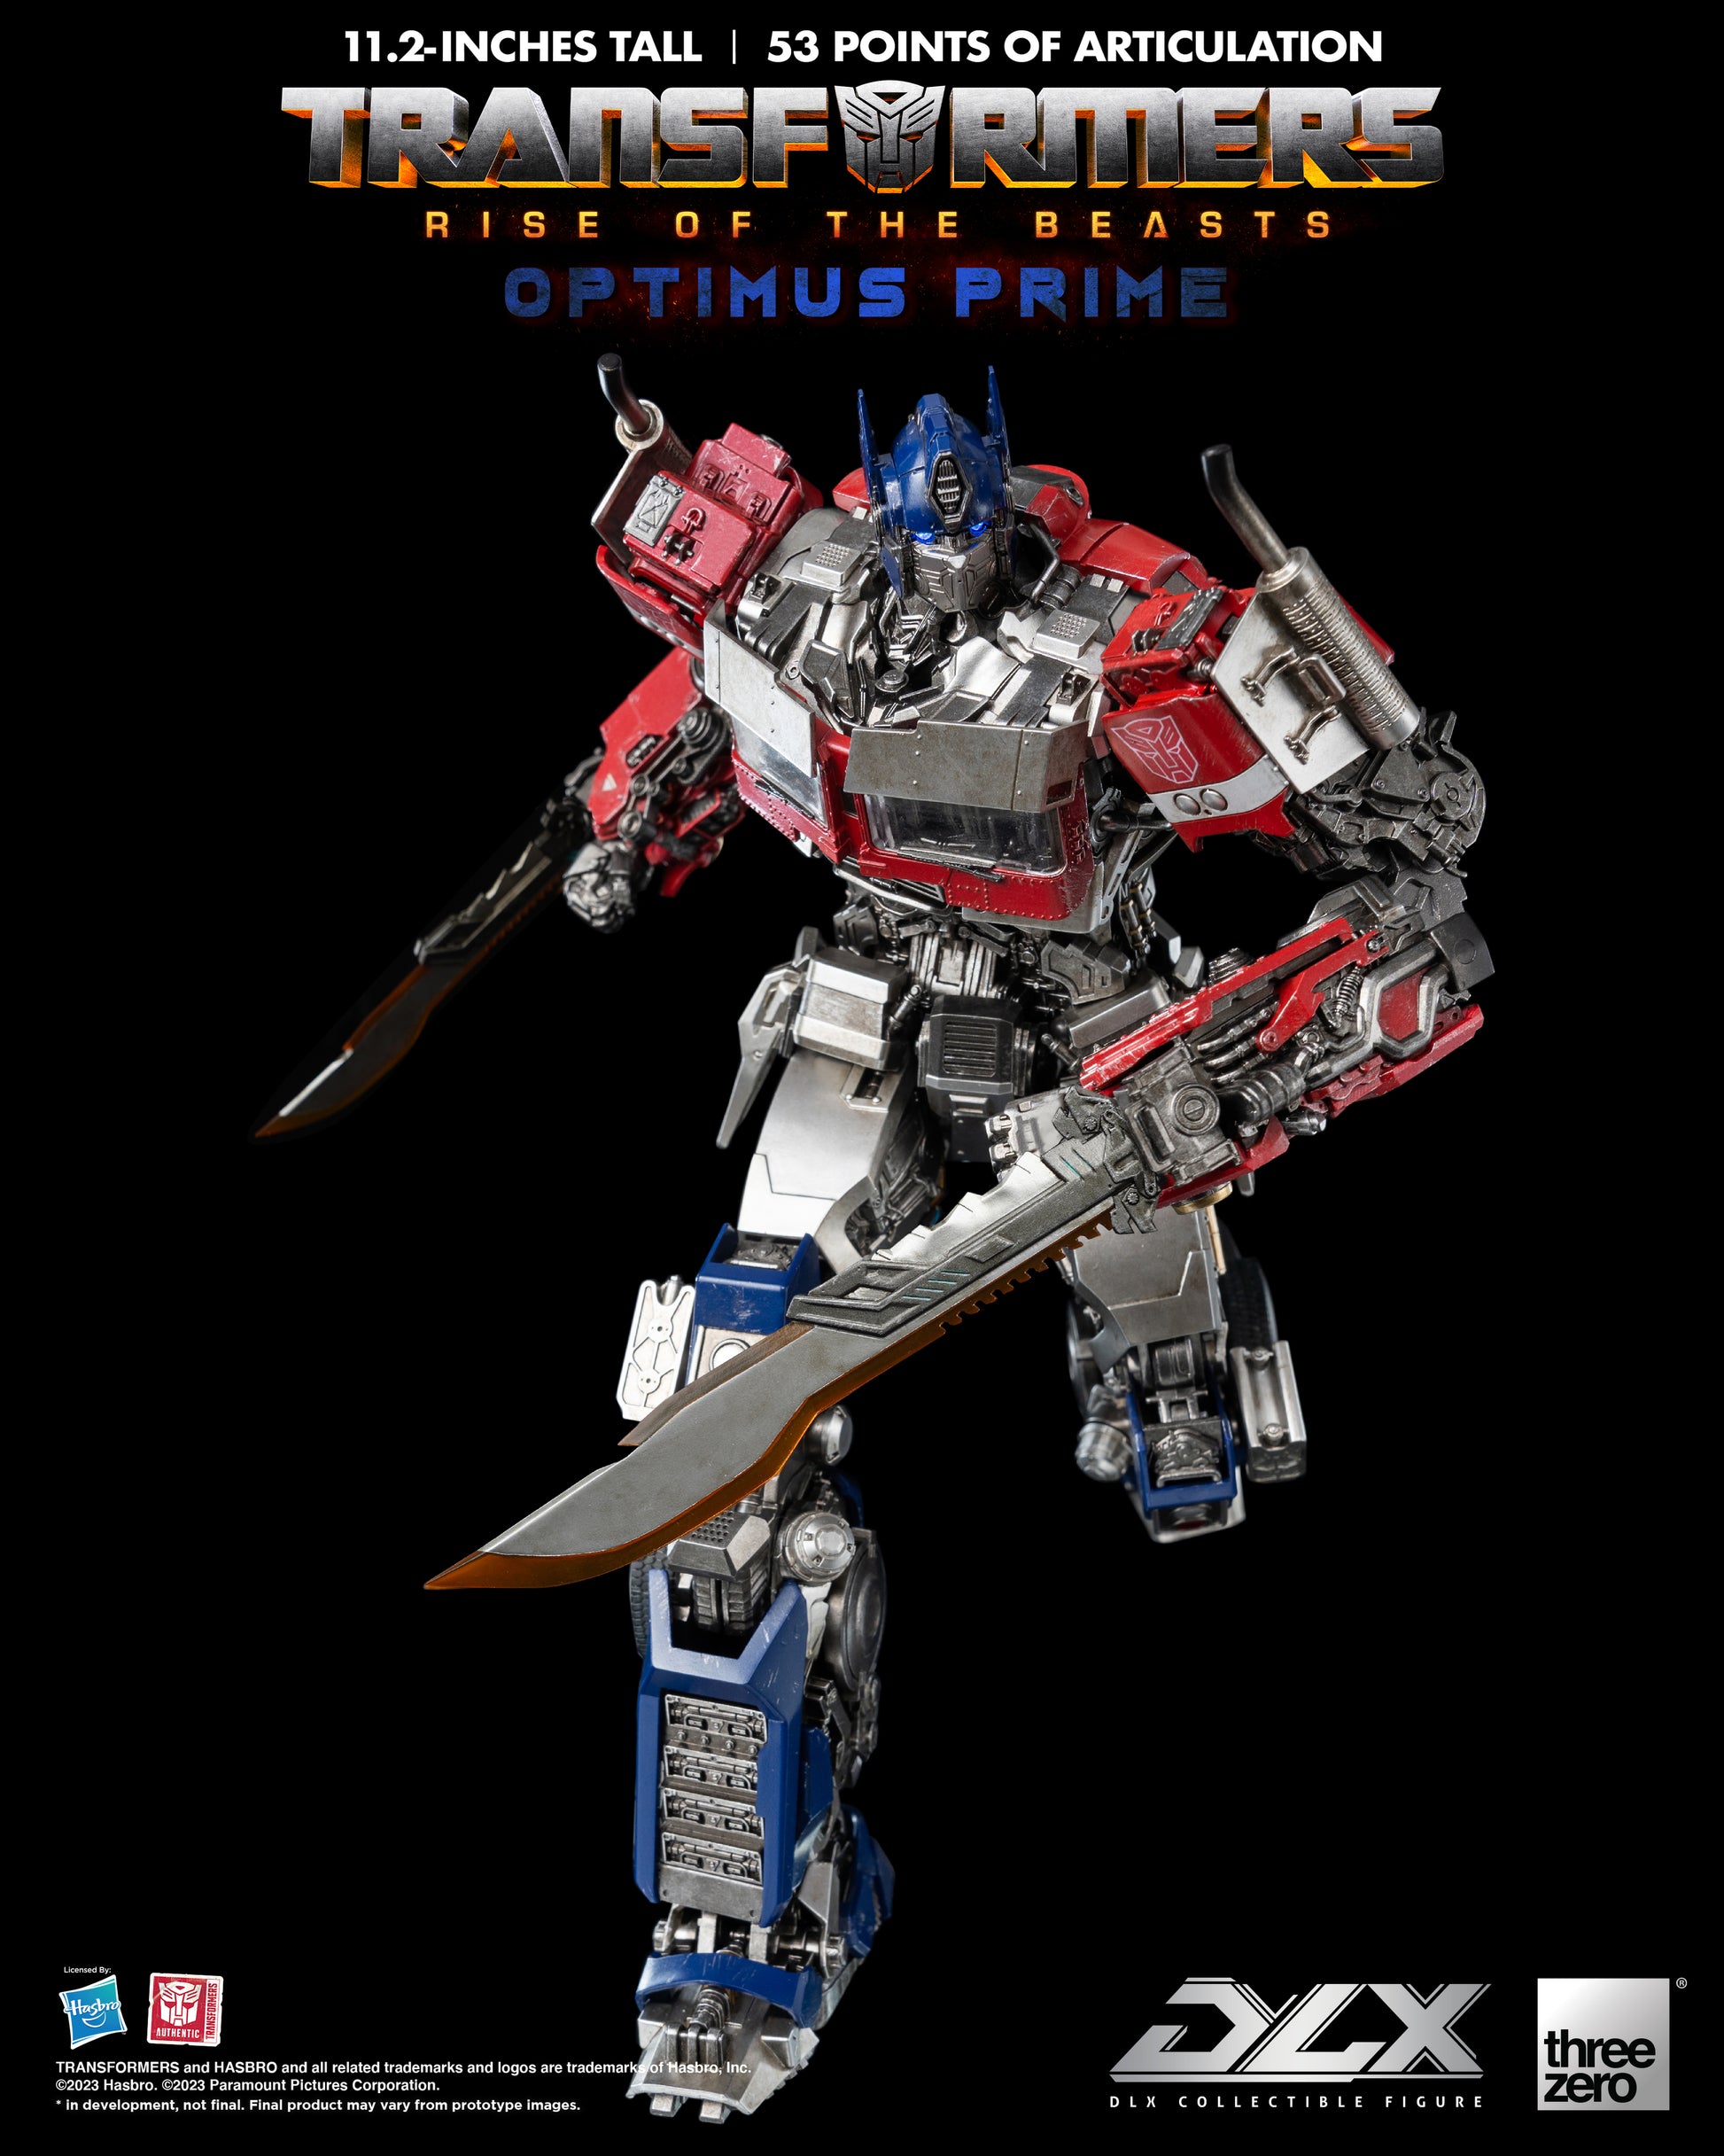 STL file Transformers Studio Series Rise of the Beasts Energon Axe